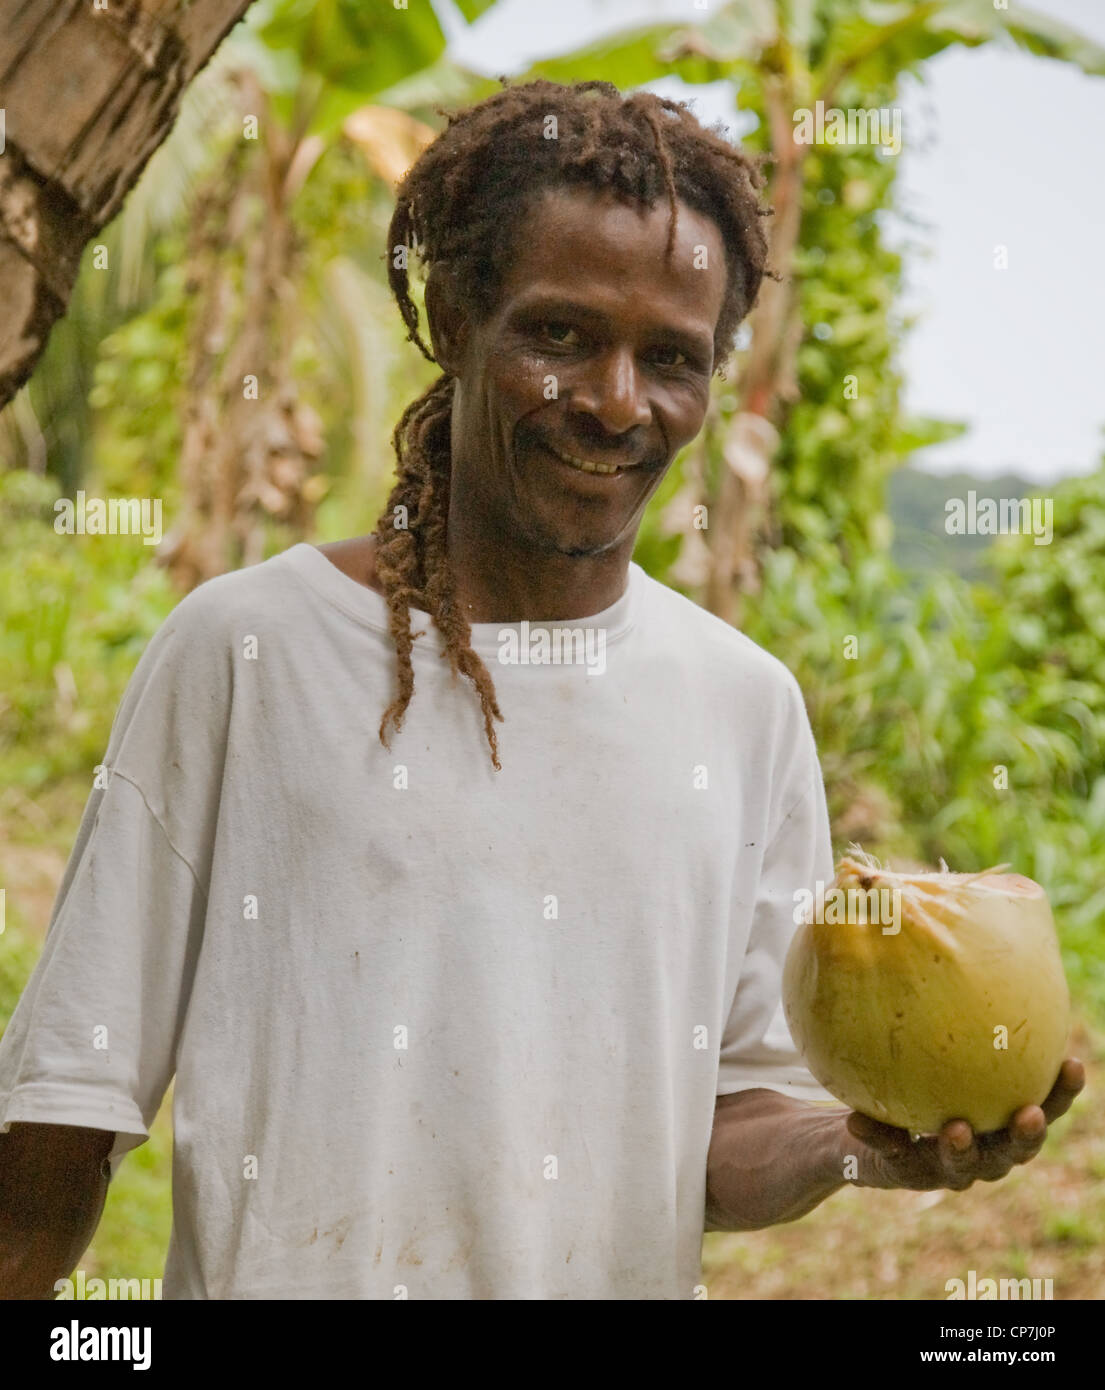 Rastafarian Dominican man about to slice open a coconut Stock Photo